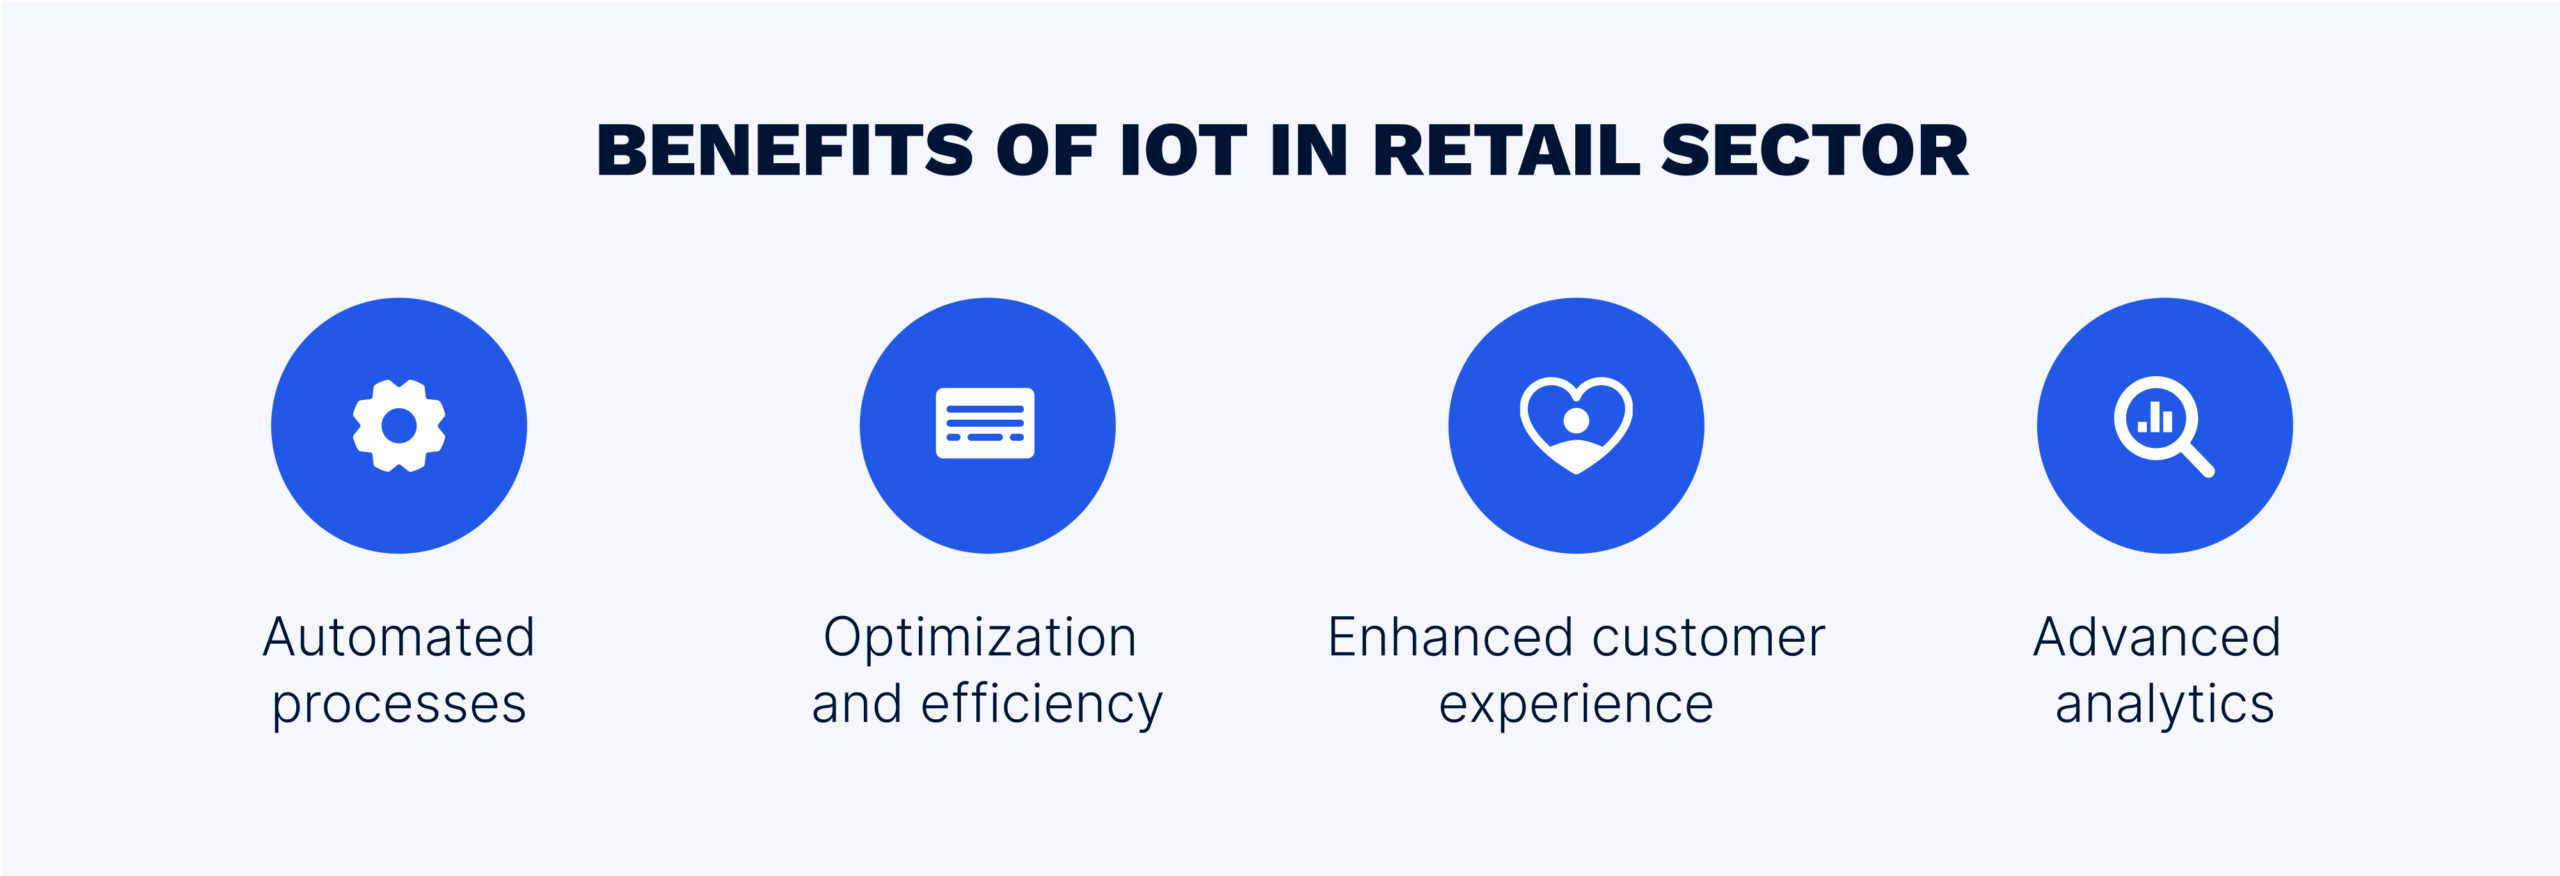 Top 4 advantage of IoT in the retail sector